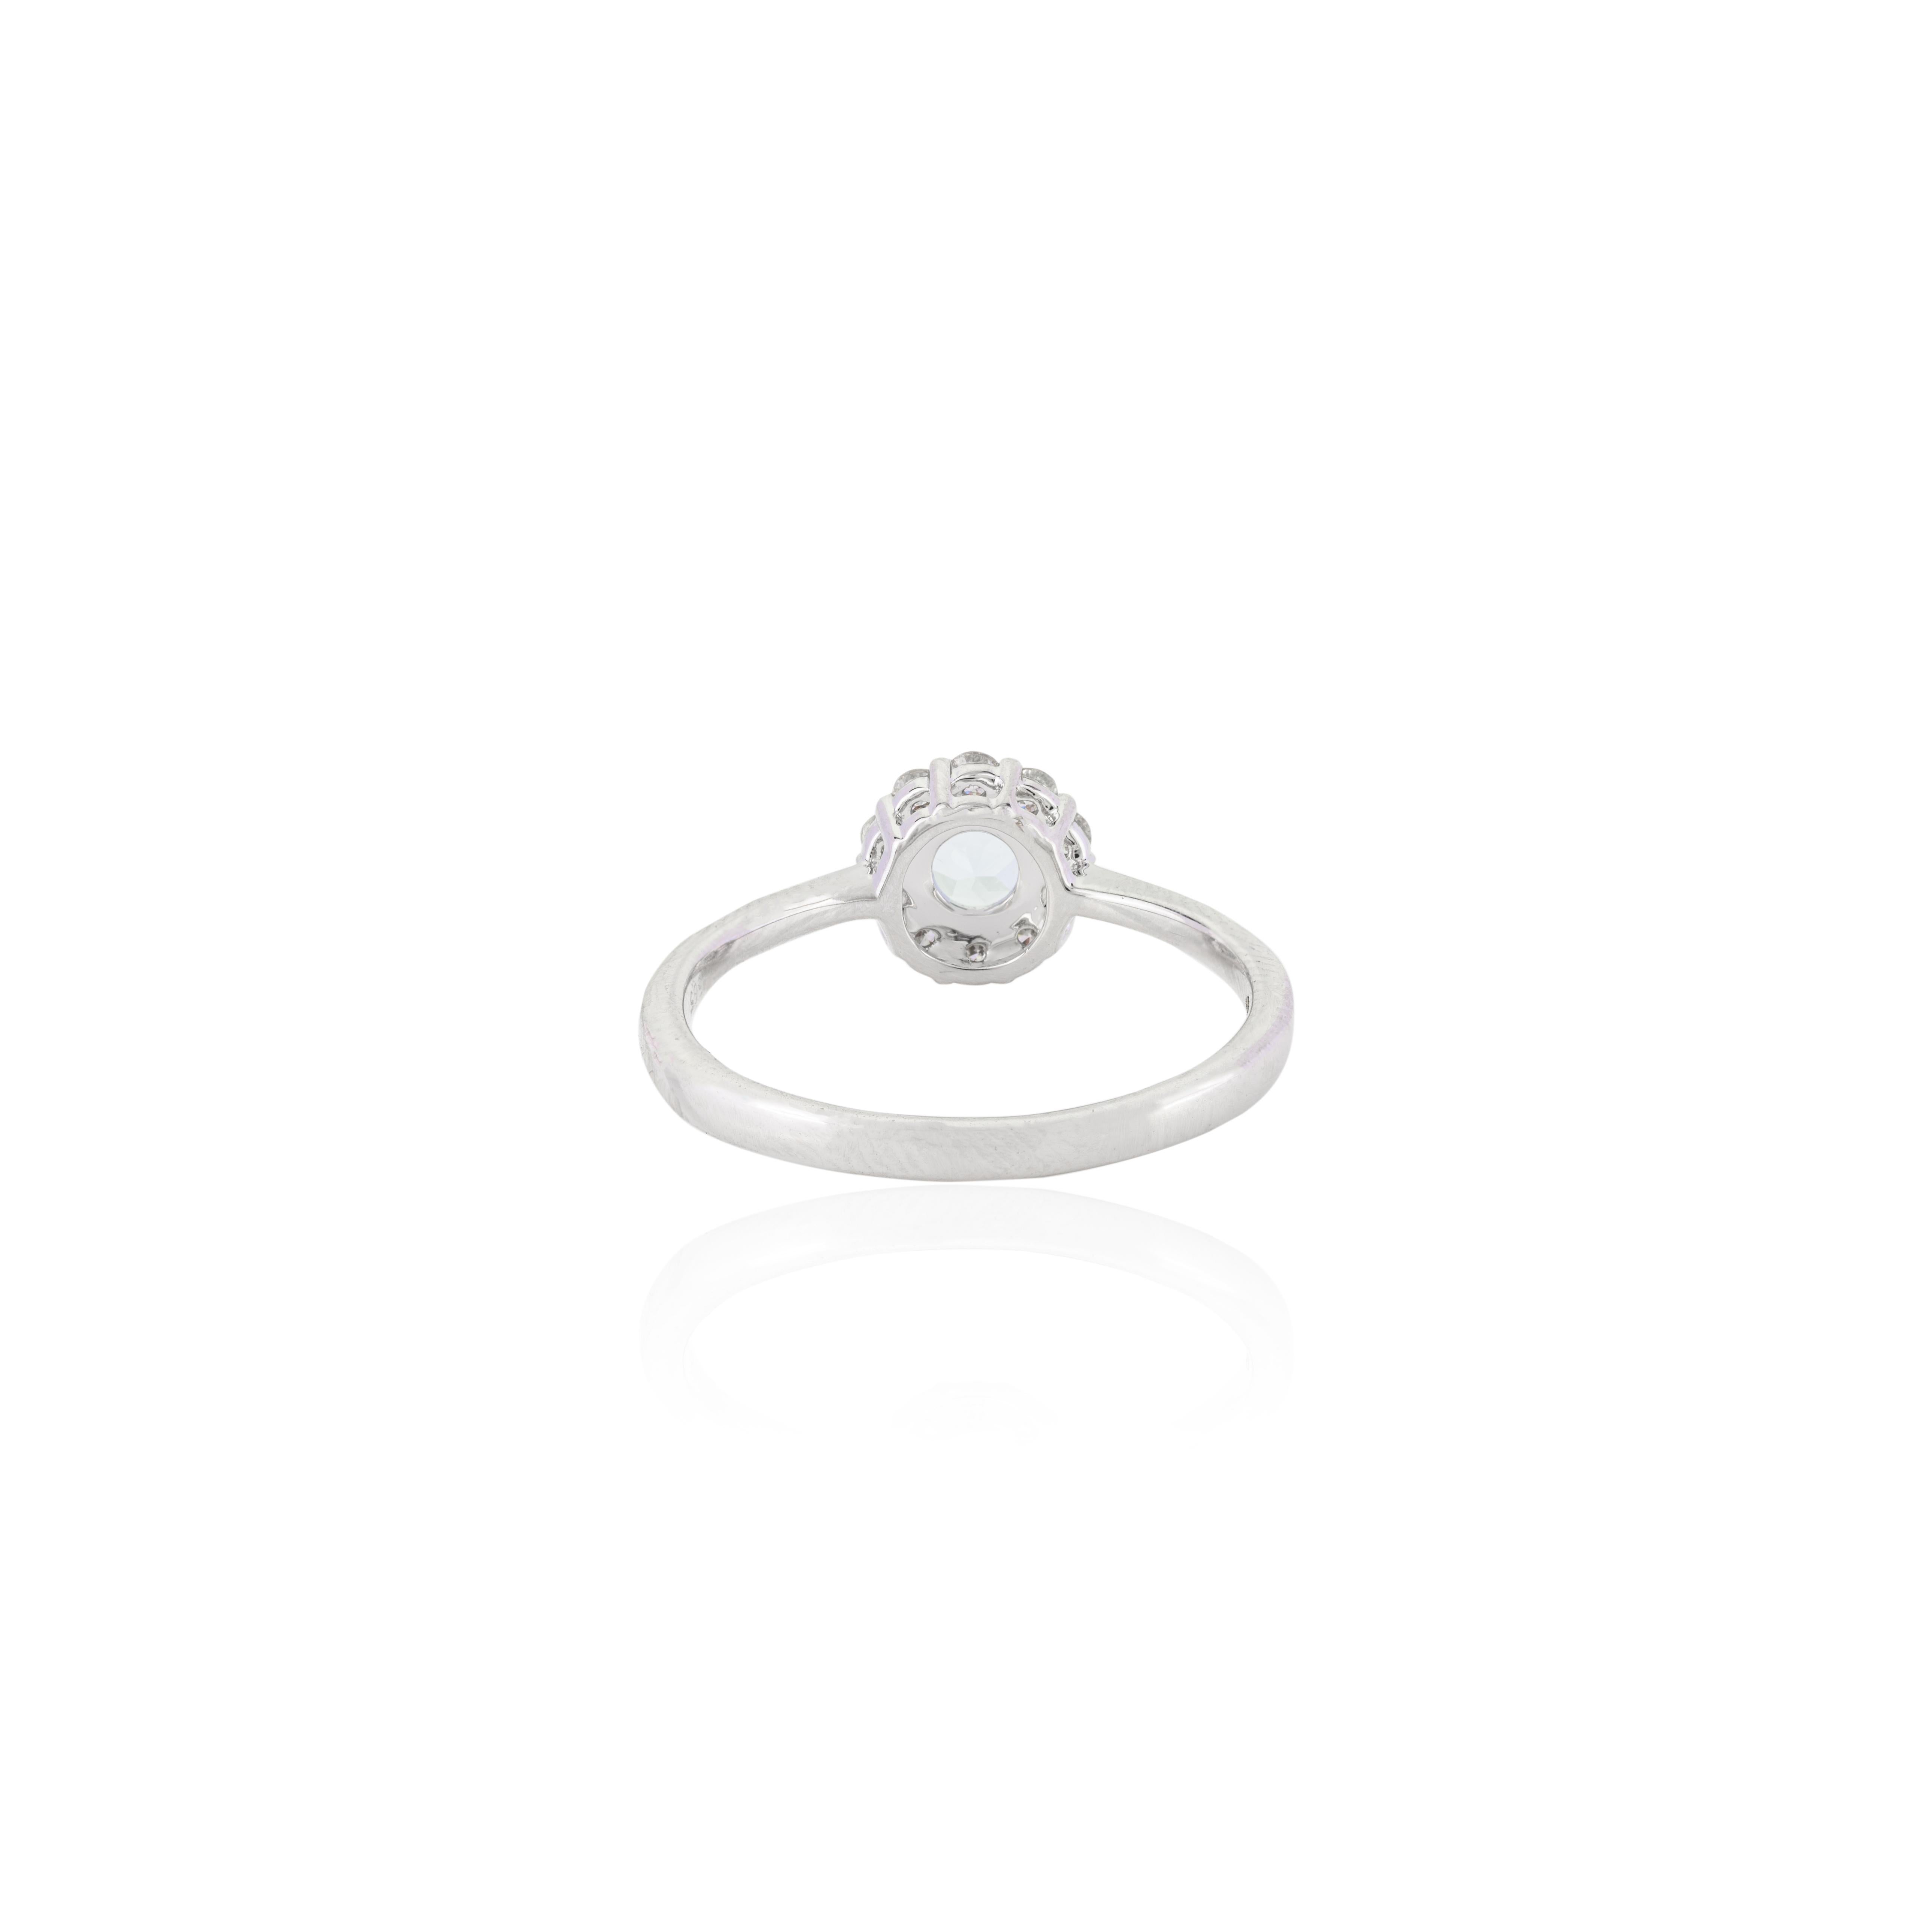 For Sale:  Dainty Aquamarine Halo Diamond Ring Gift for Girlfriend in 14k White Gold 3